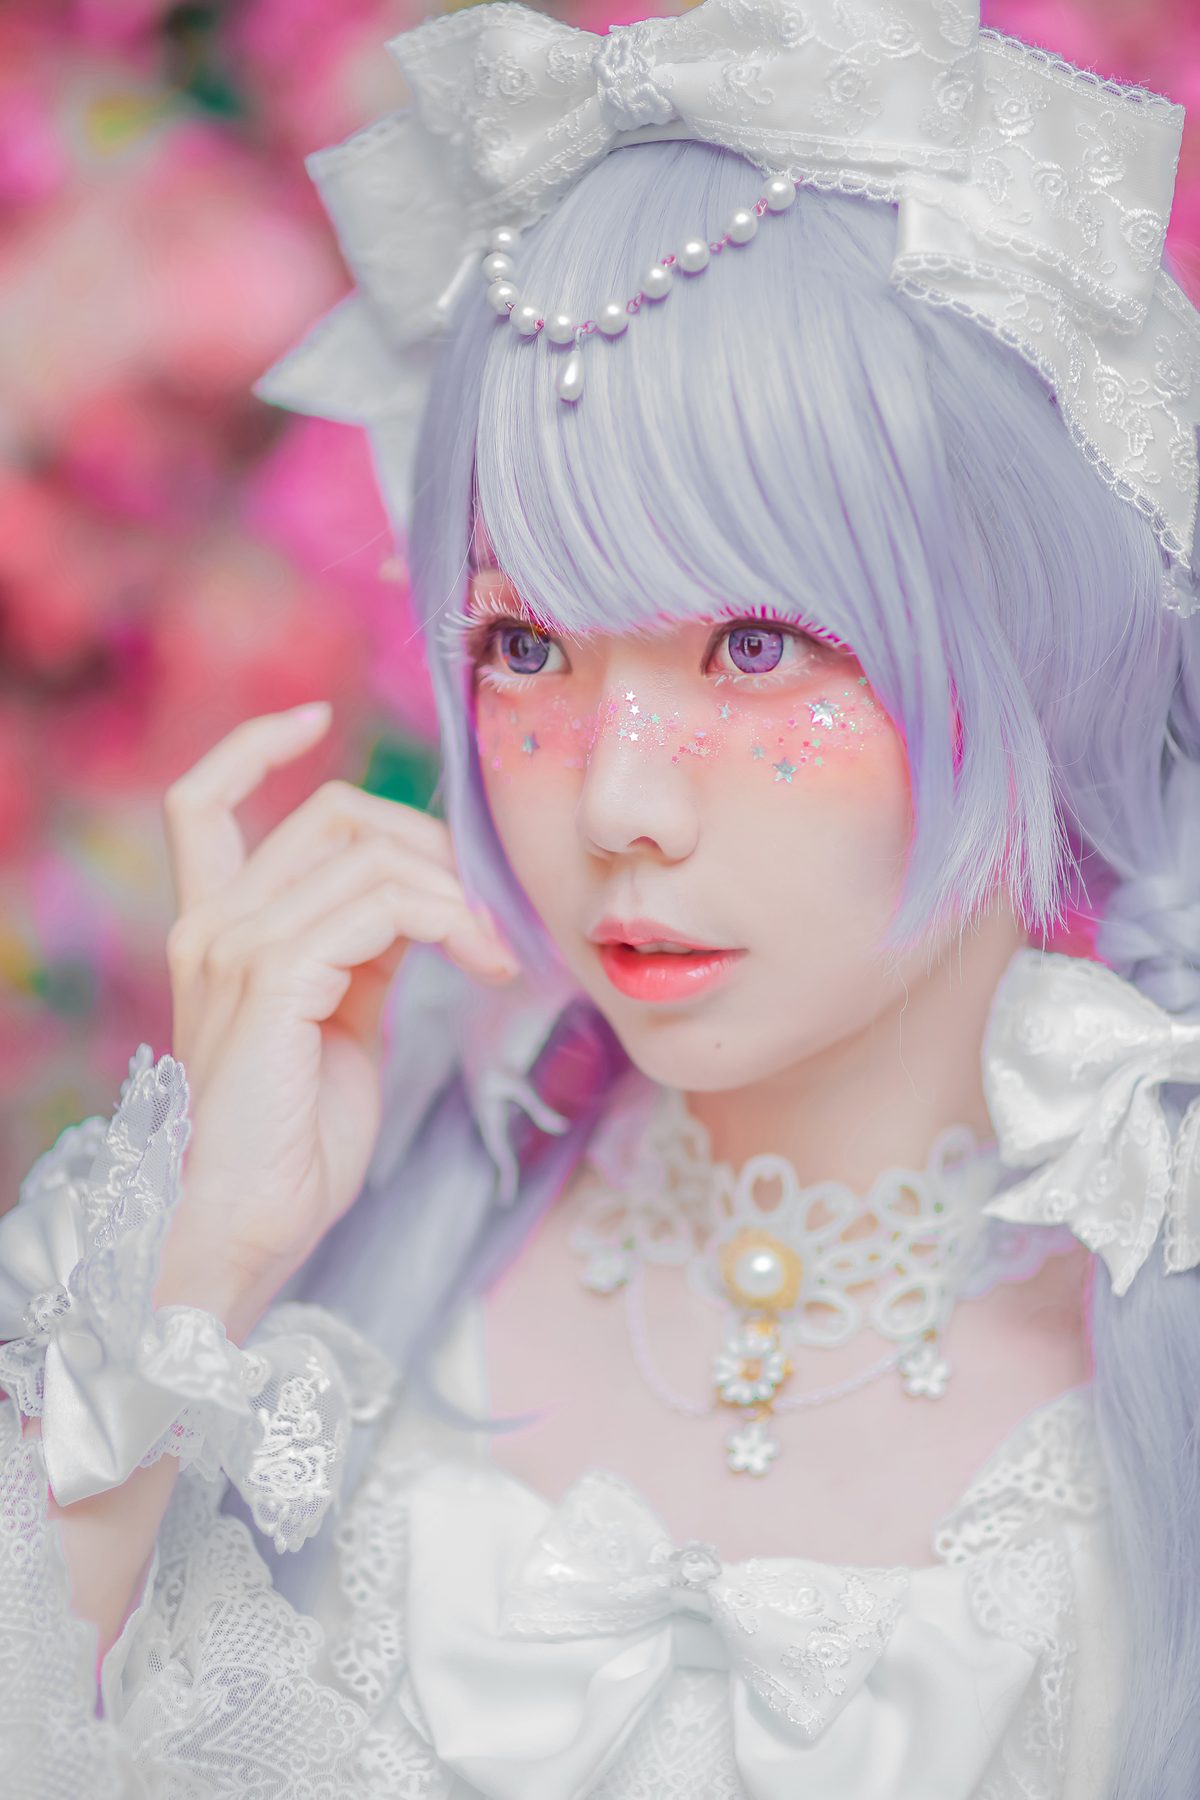 Coser@Ely_eee ElyEE子 TUESDAY TWINTAIL A 0052 5538835887.jpg